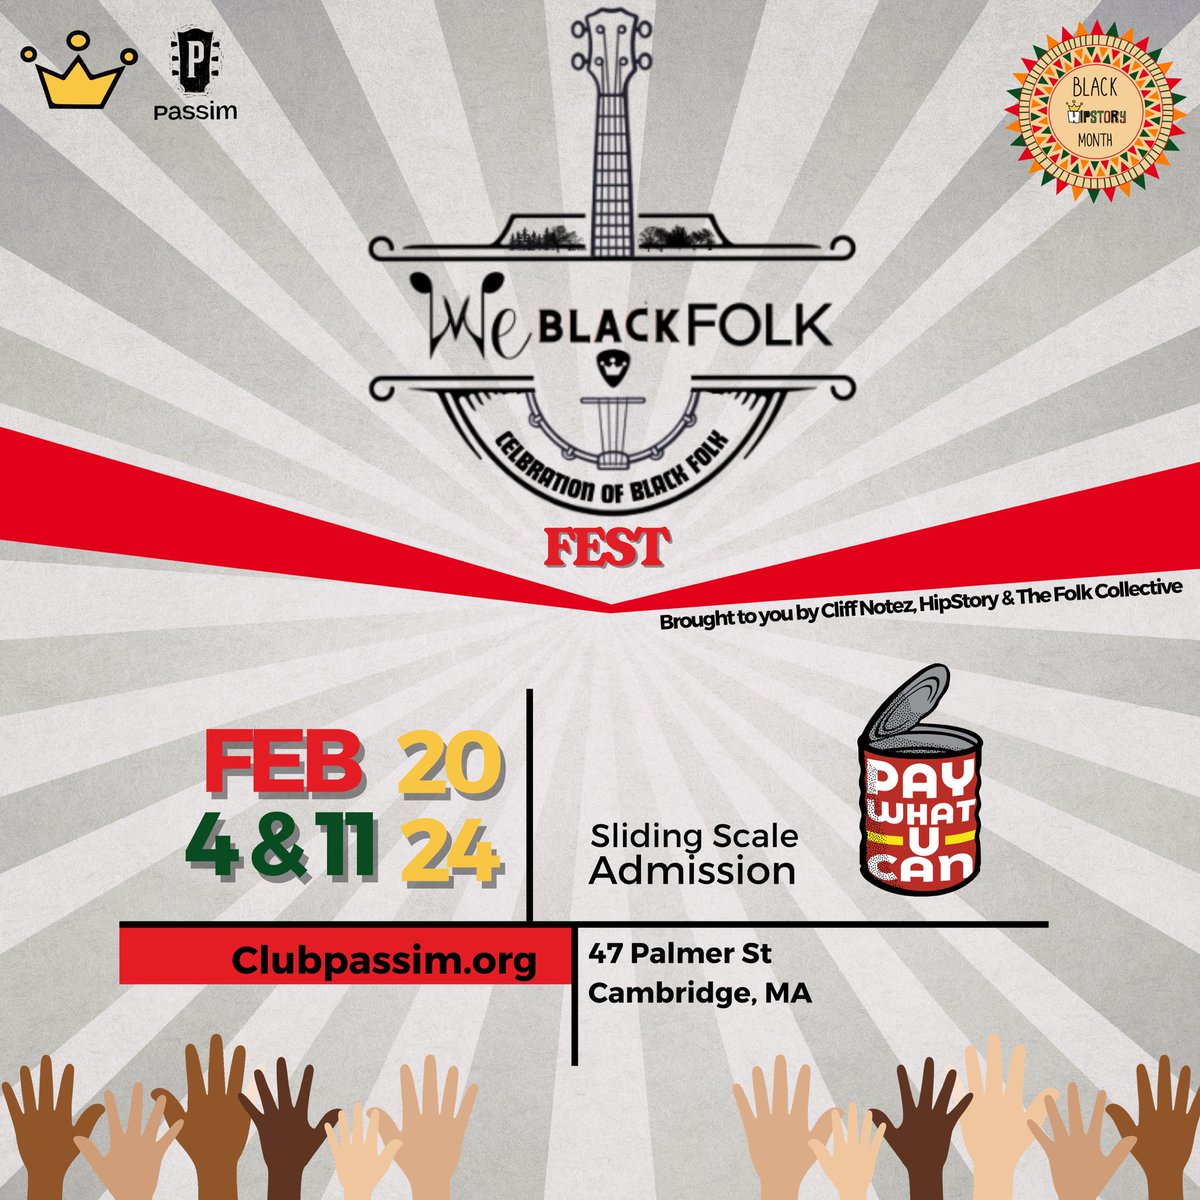 Reclaiming folk music “We Black Folk Festival” will be Massachusetts’ first ever black folk festival produced by @cliffnotezz with @clubpassim passim.org/live-music/eve…